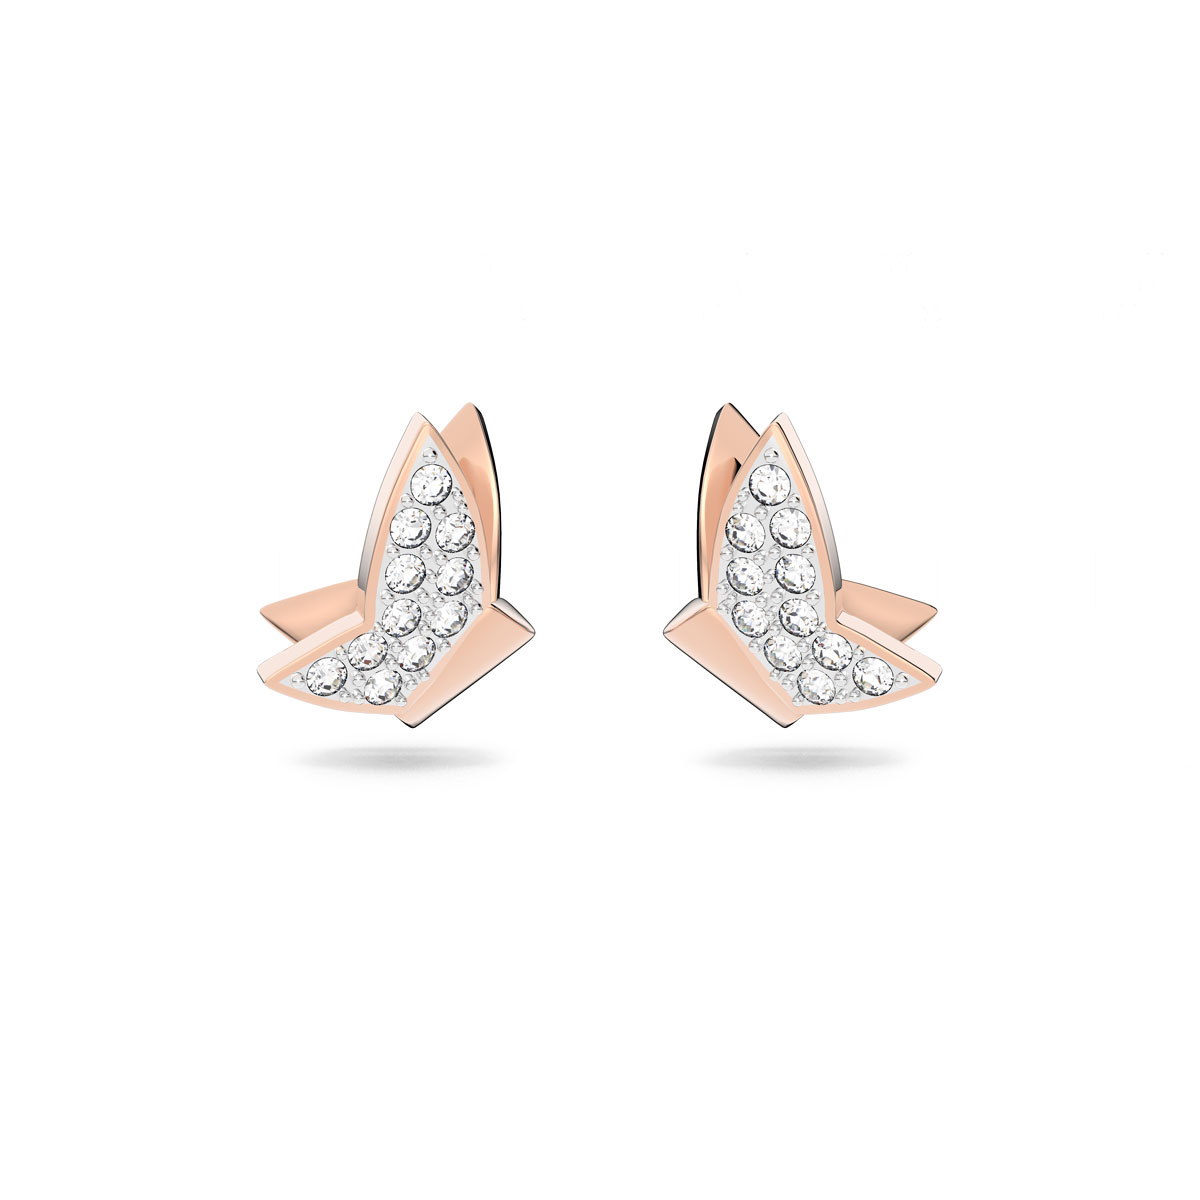 Swarovski Lilia Stud Earrings, Butterfly, White, Rose-Gold Tone Plated